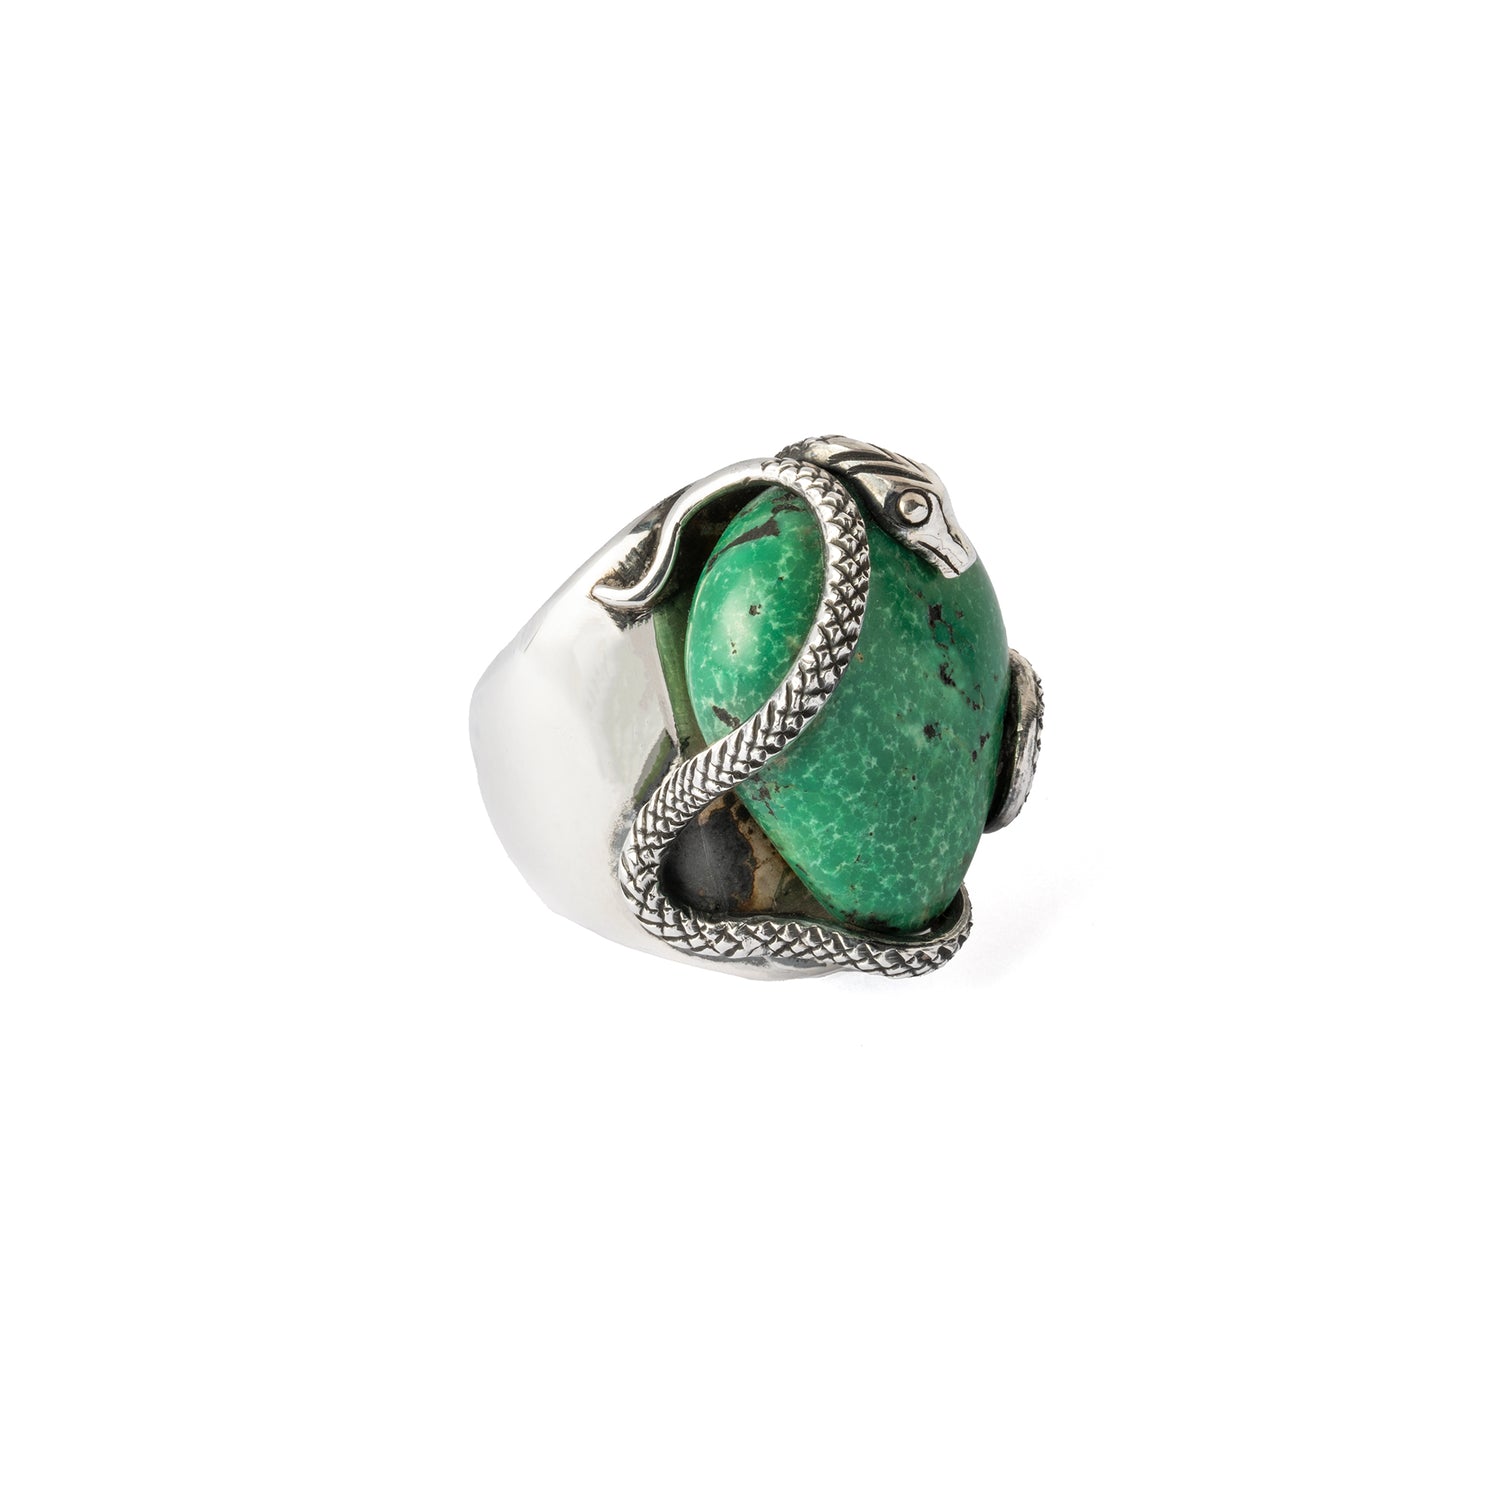 Hallmarked Silver Snake Ring with Tibetan Turquoise